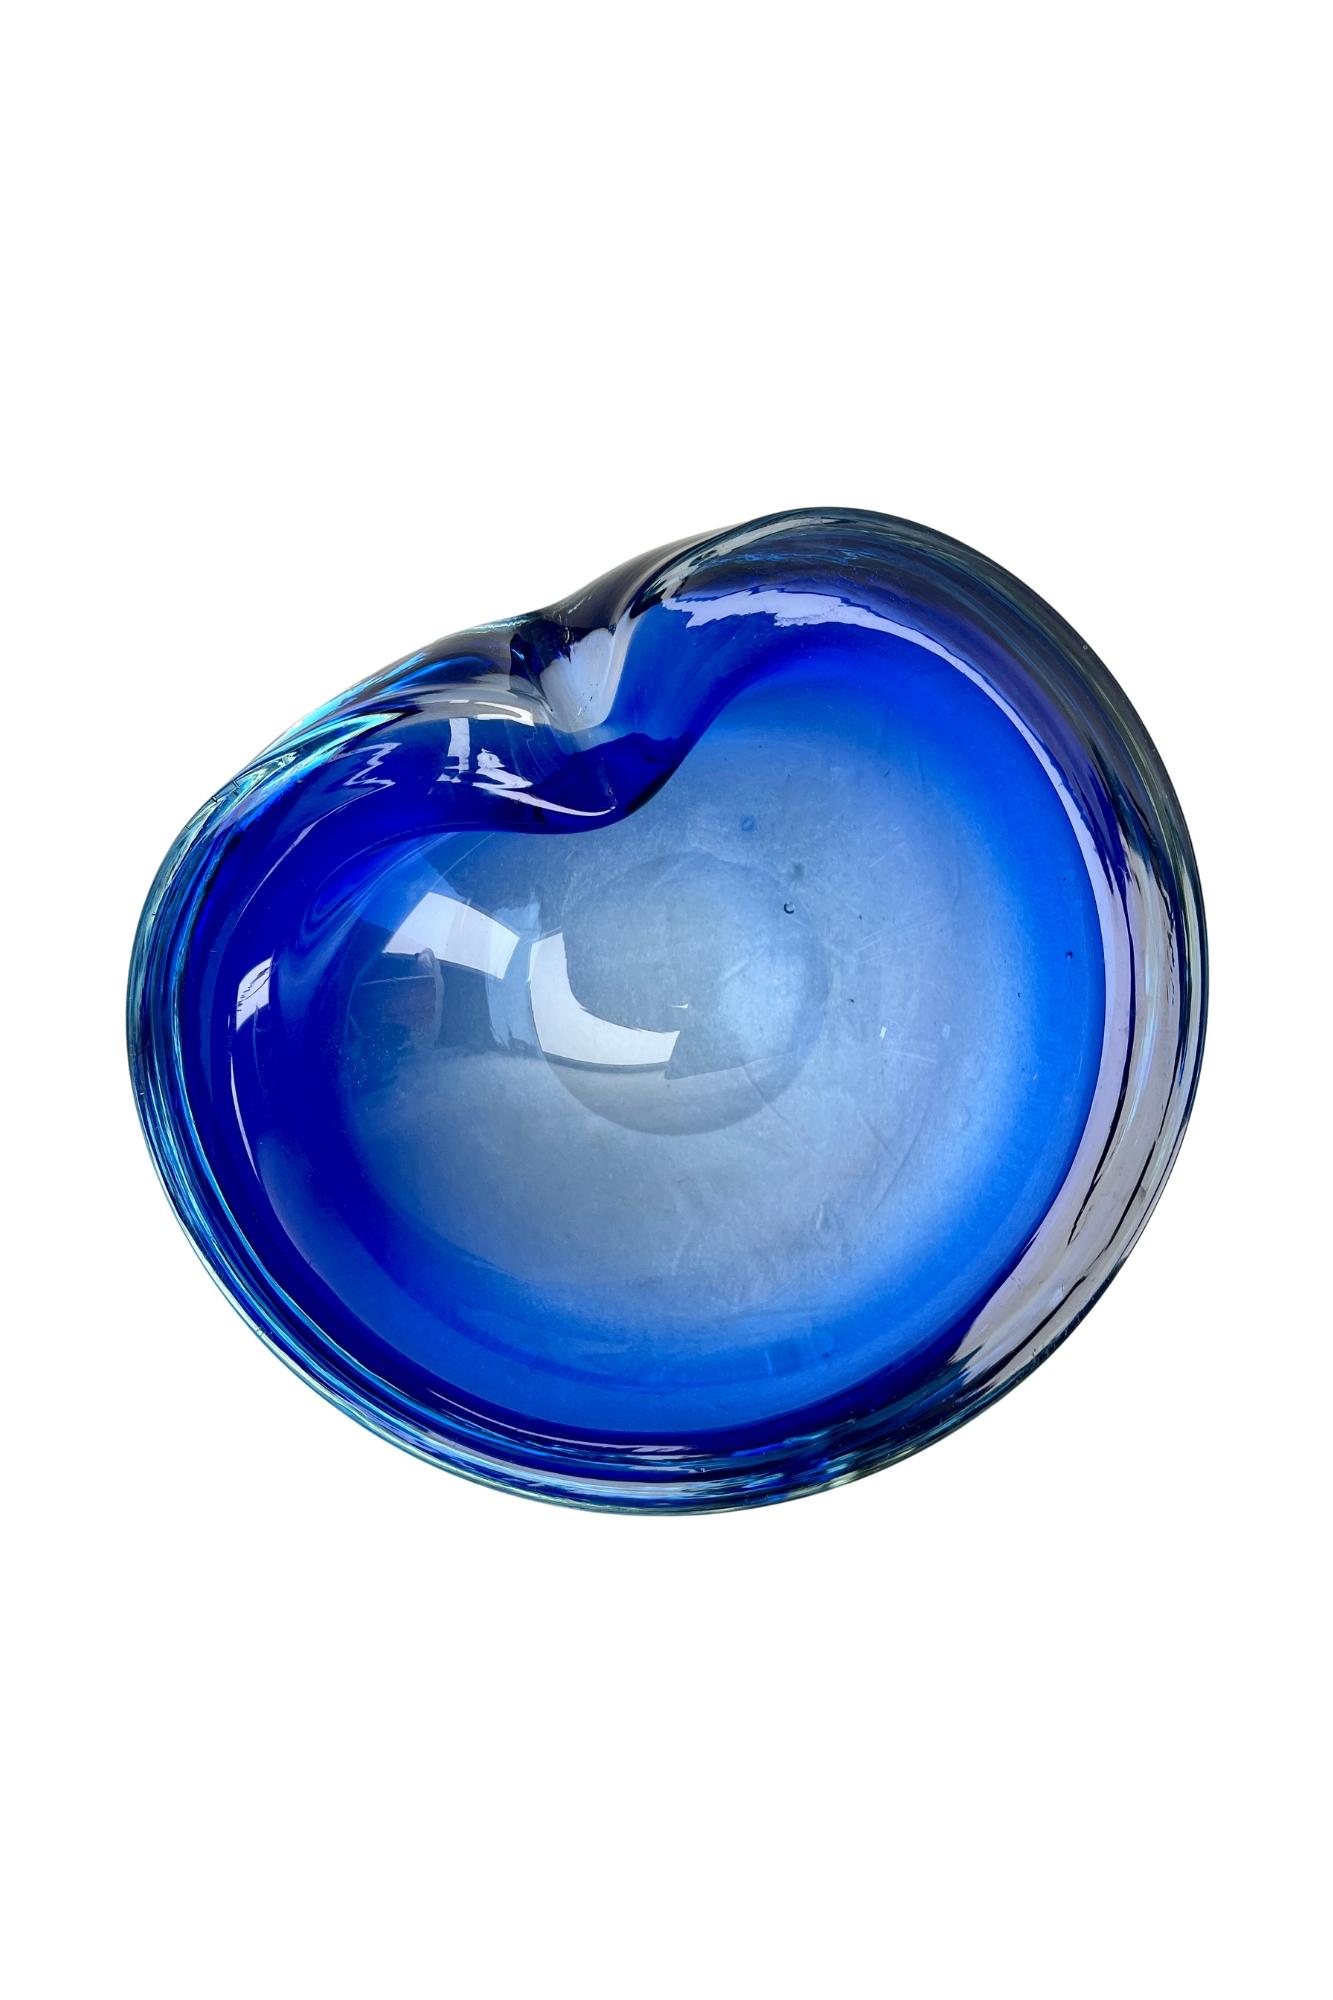 Hand-Crafted Murano Glass Cobalt Bowl Attributed to Flavio Poli for Somerso For Sale